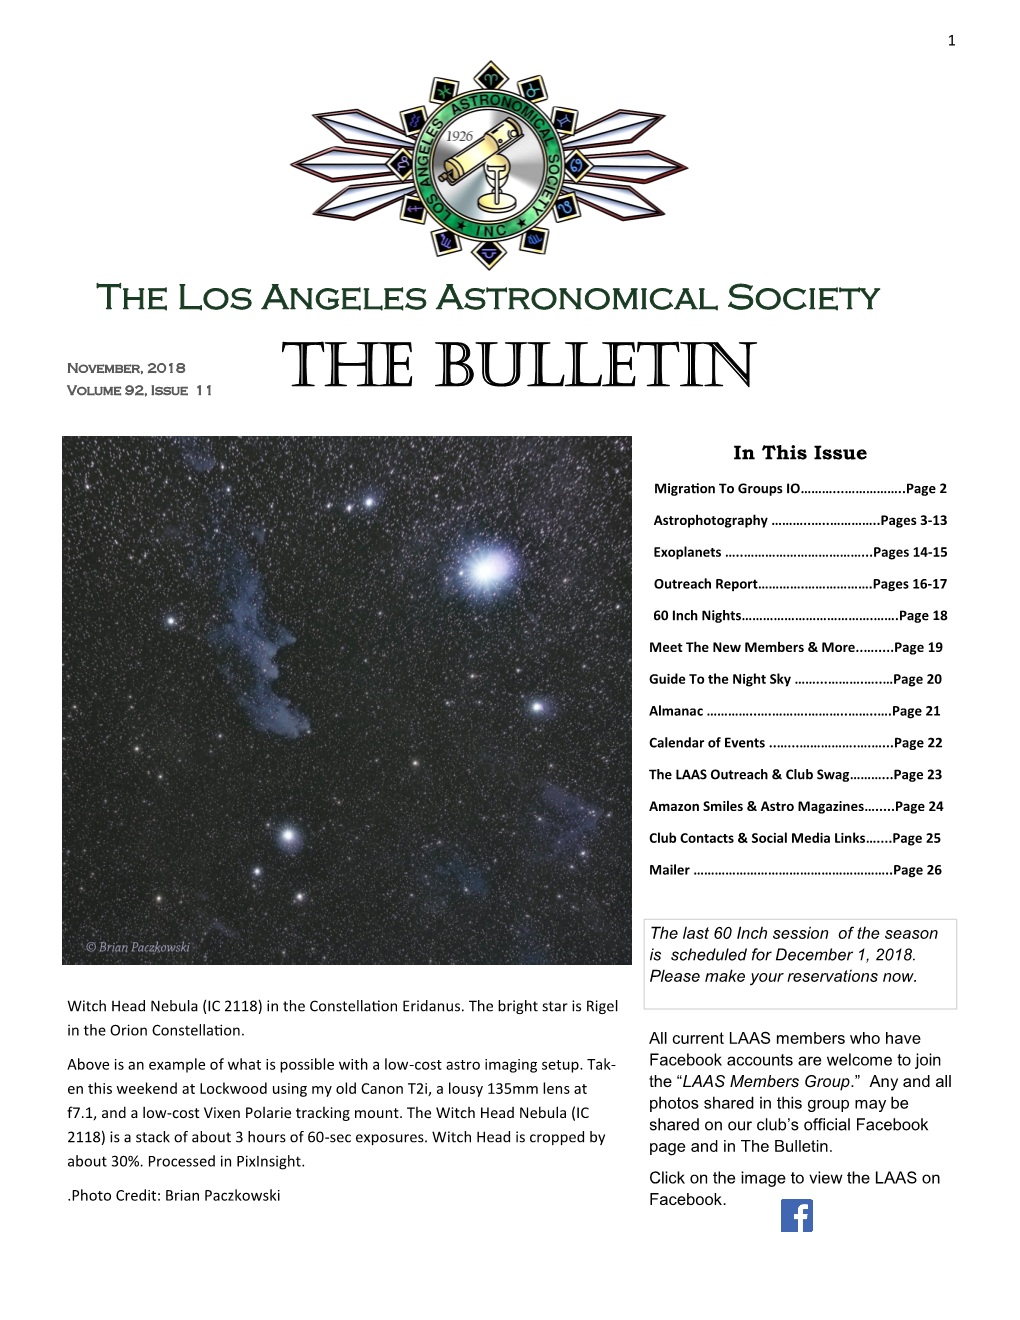 The Bulletin Volume 92, Issue 11